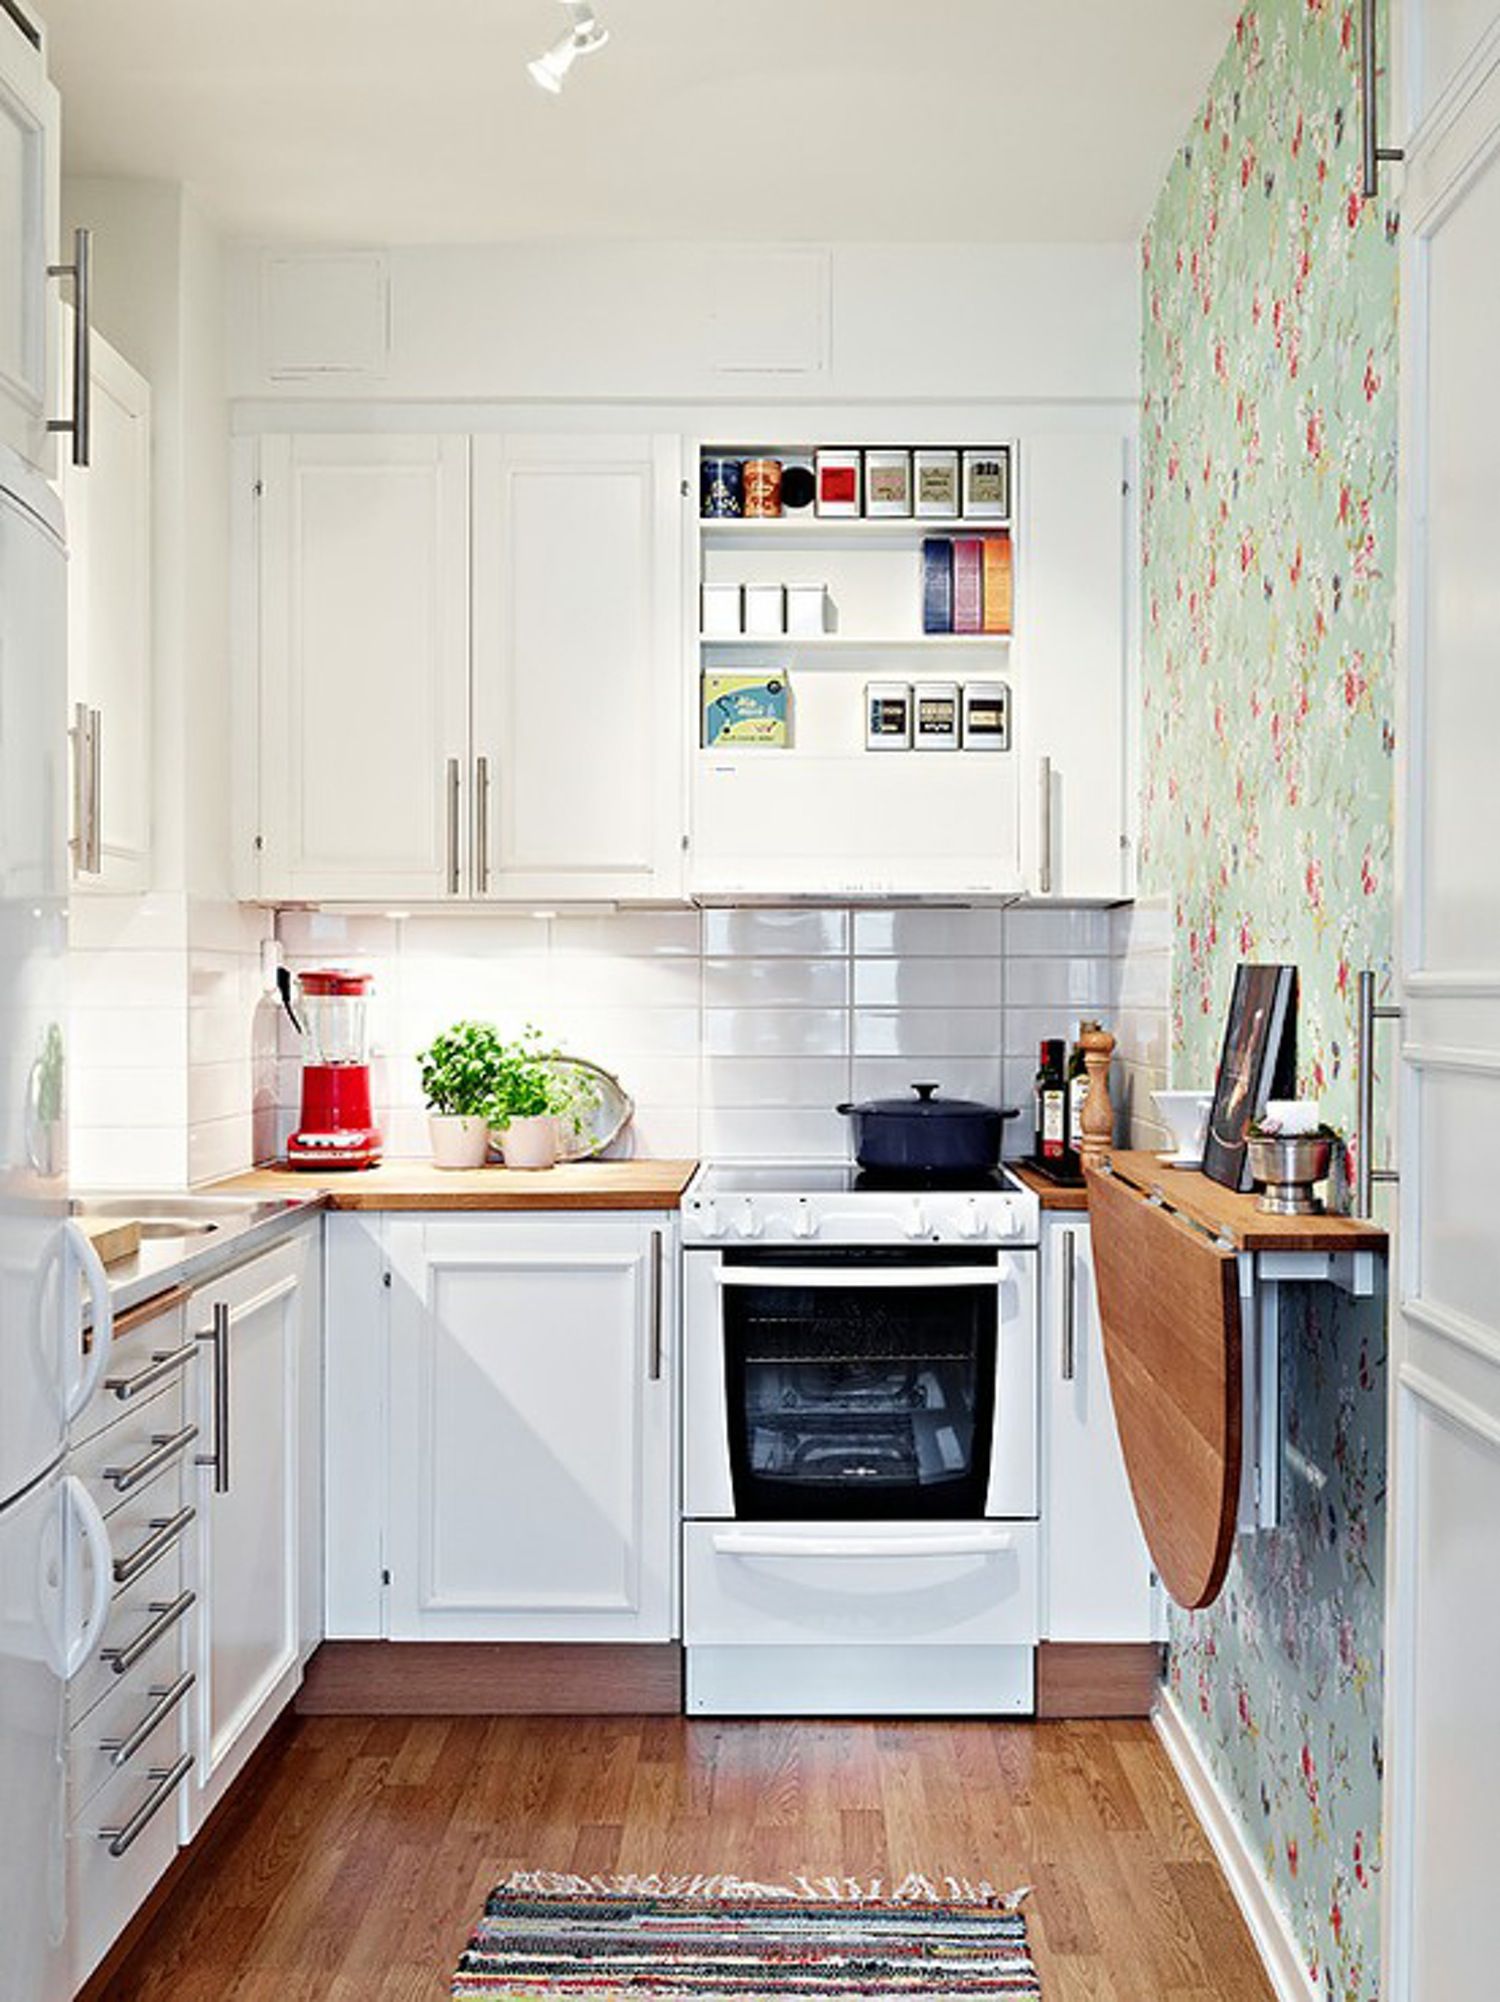 Making small kitchens bigger: That’s how it works!